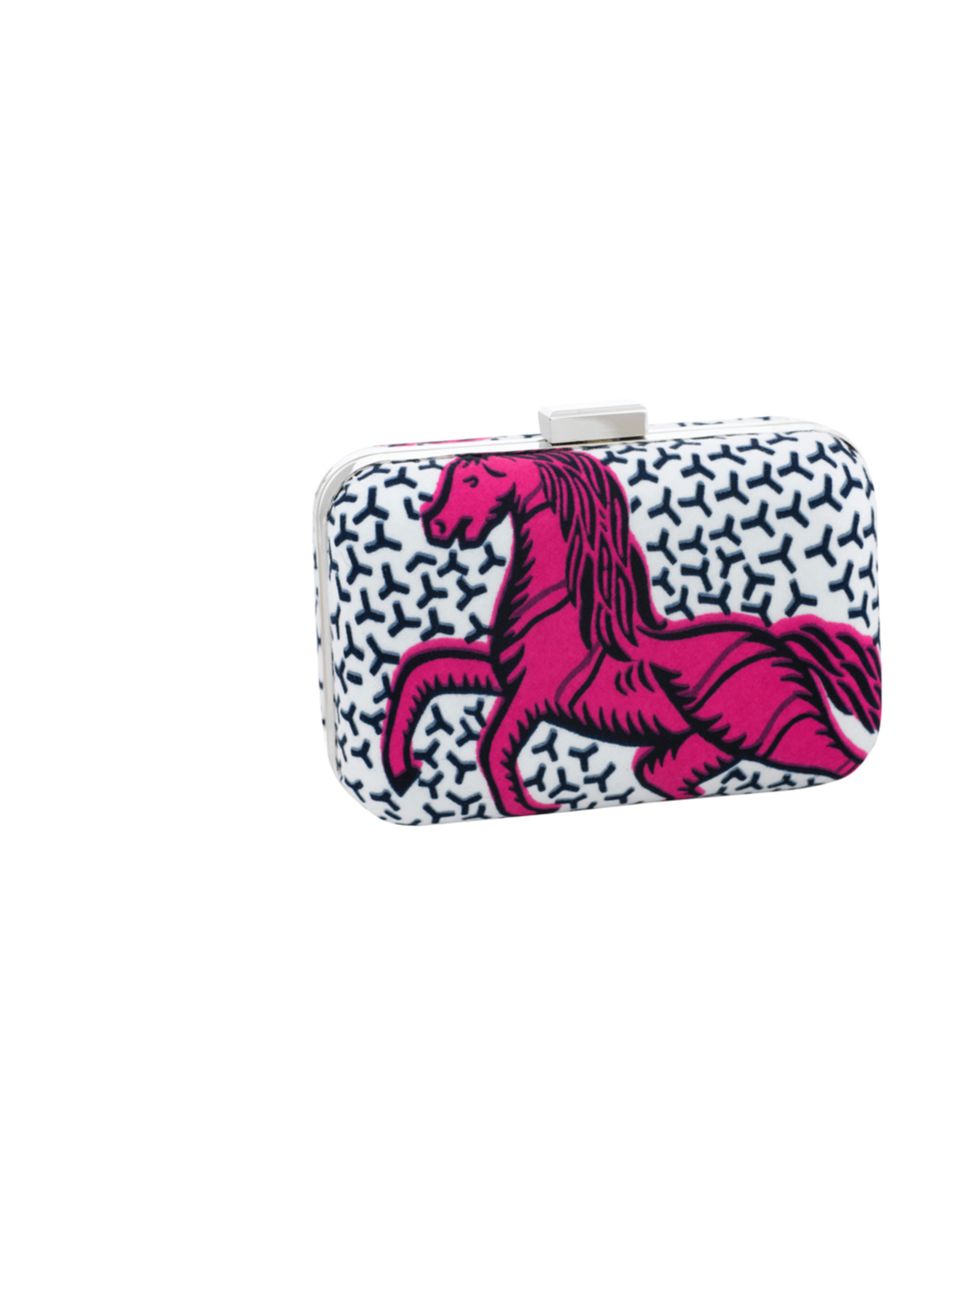 <p>Summer weddings, garden parties and rooftop drinking deserve a fanciful and vibrant clutch, dont you agree?... Doreen Mashika horse print clutch, £49 at Fenwick, for stockists call 0207 629 9161</p>